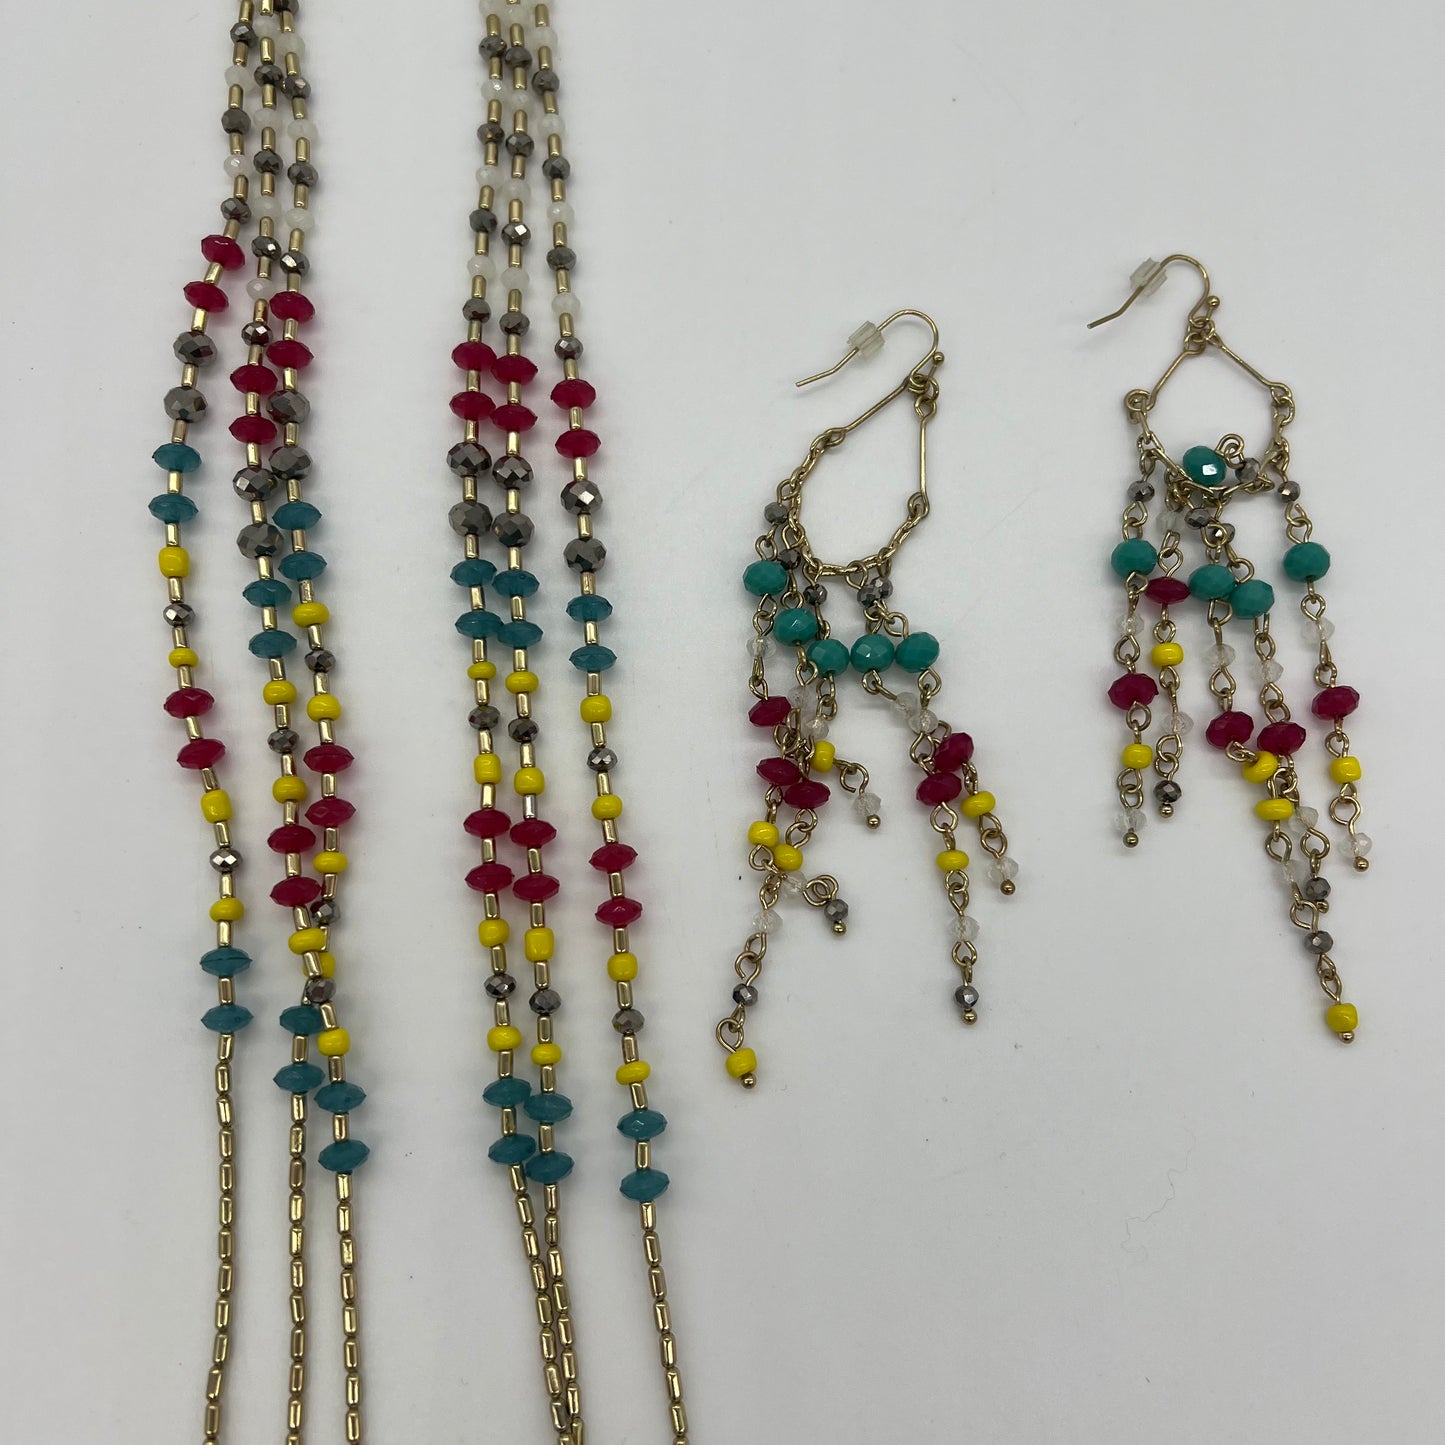 Matching Bright Beaded Necklace and Earrings